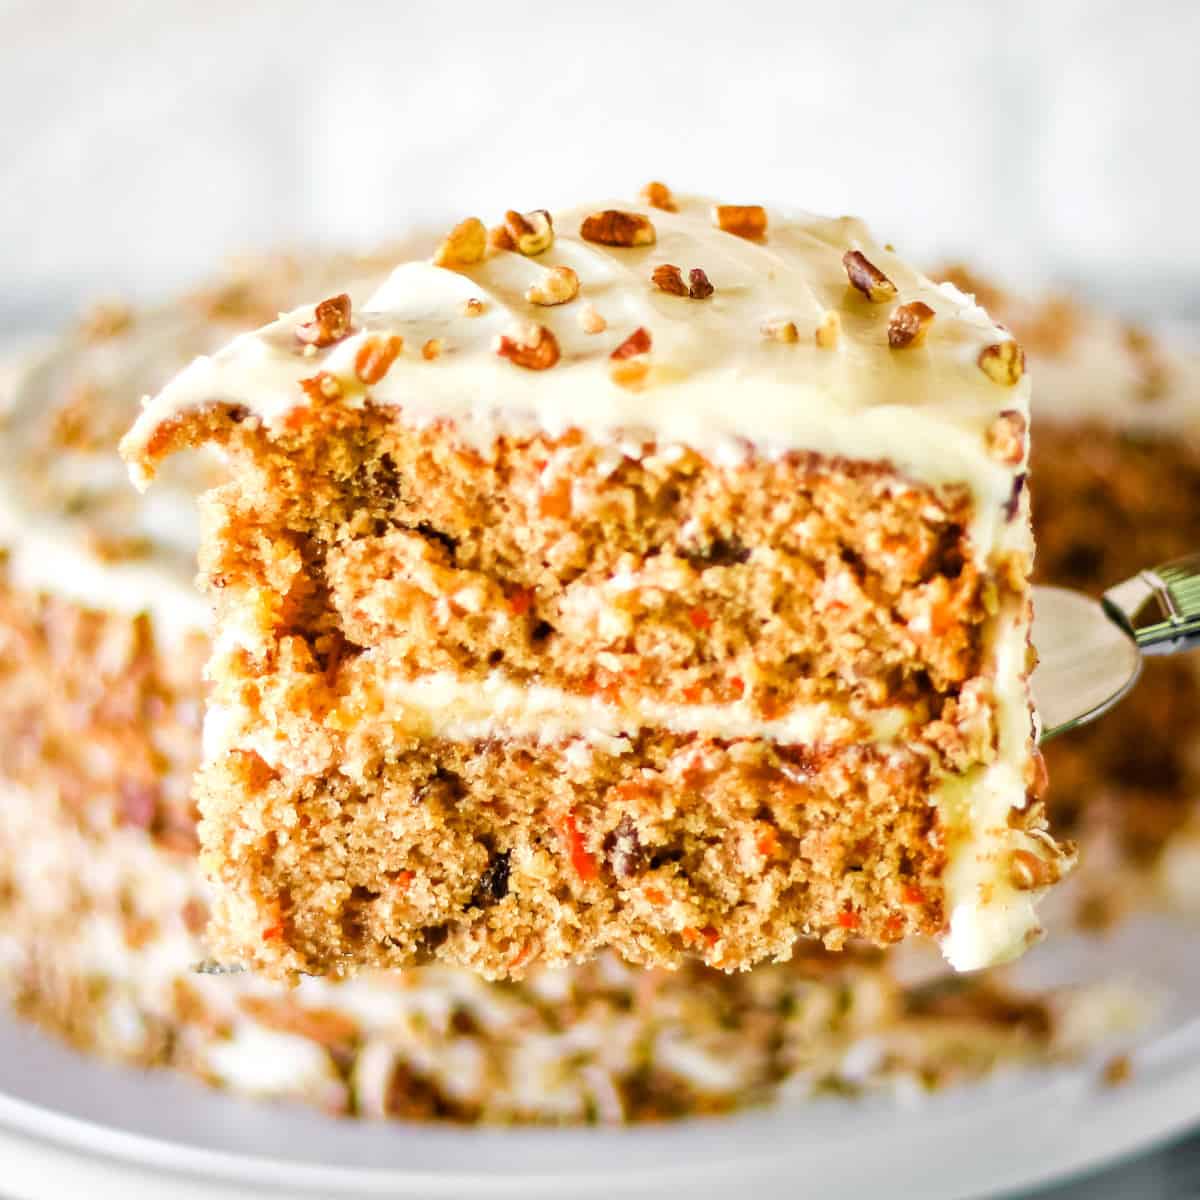 Close up of a slice of homemade carrot cake on a silver cake server.